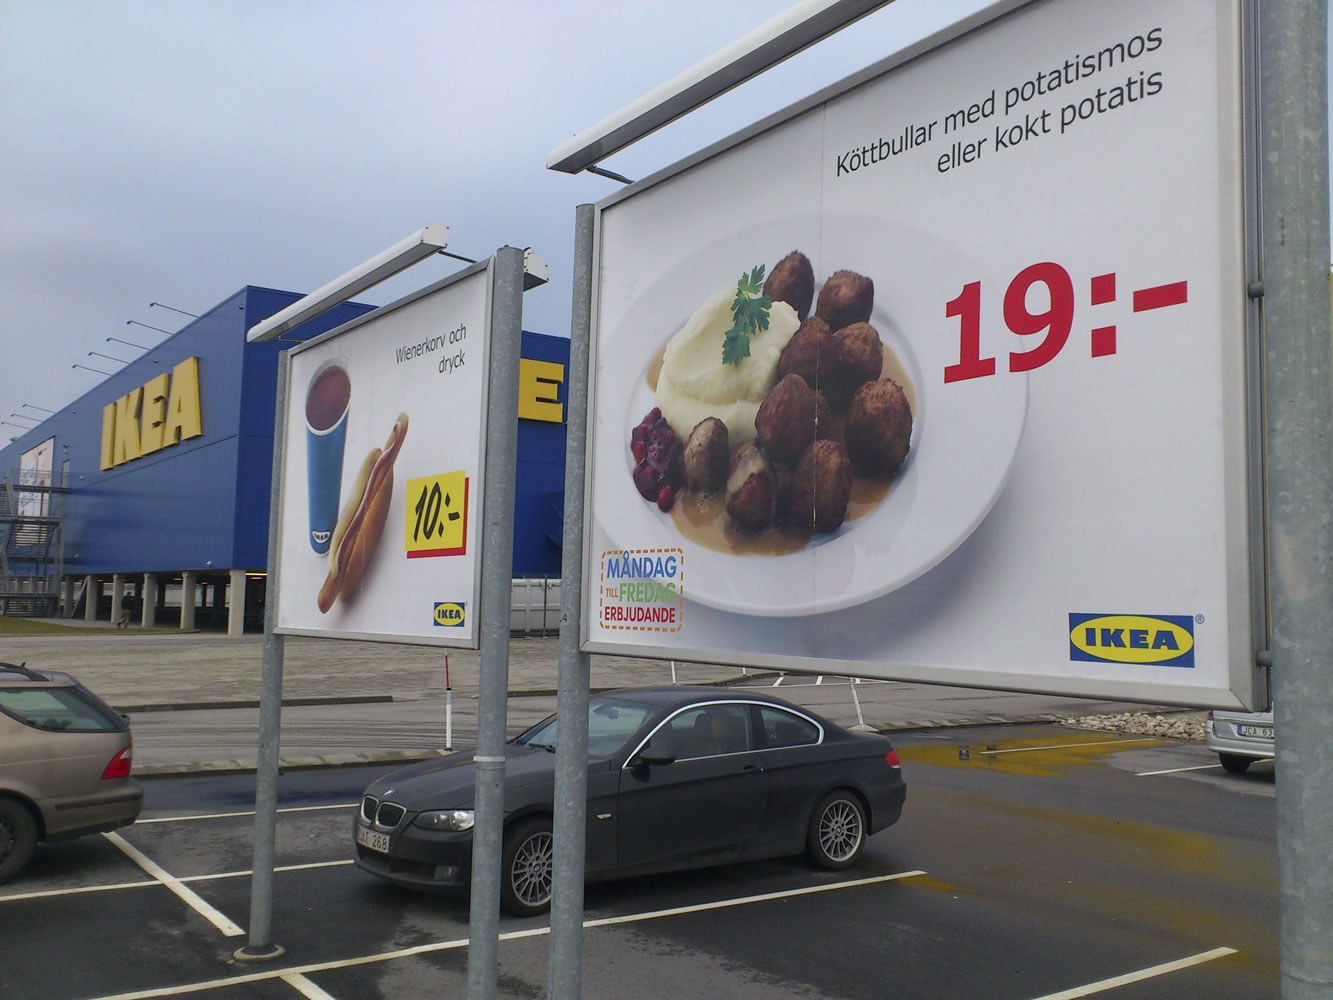 Advertising for Ikea meatballs in the parking area at an Ikea store in Malmo, Sweden, on Monday.